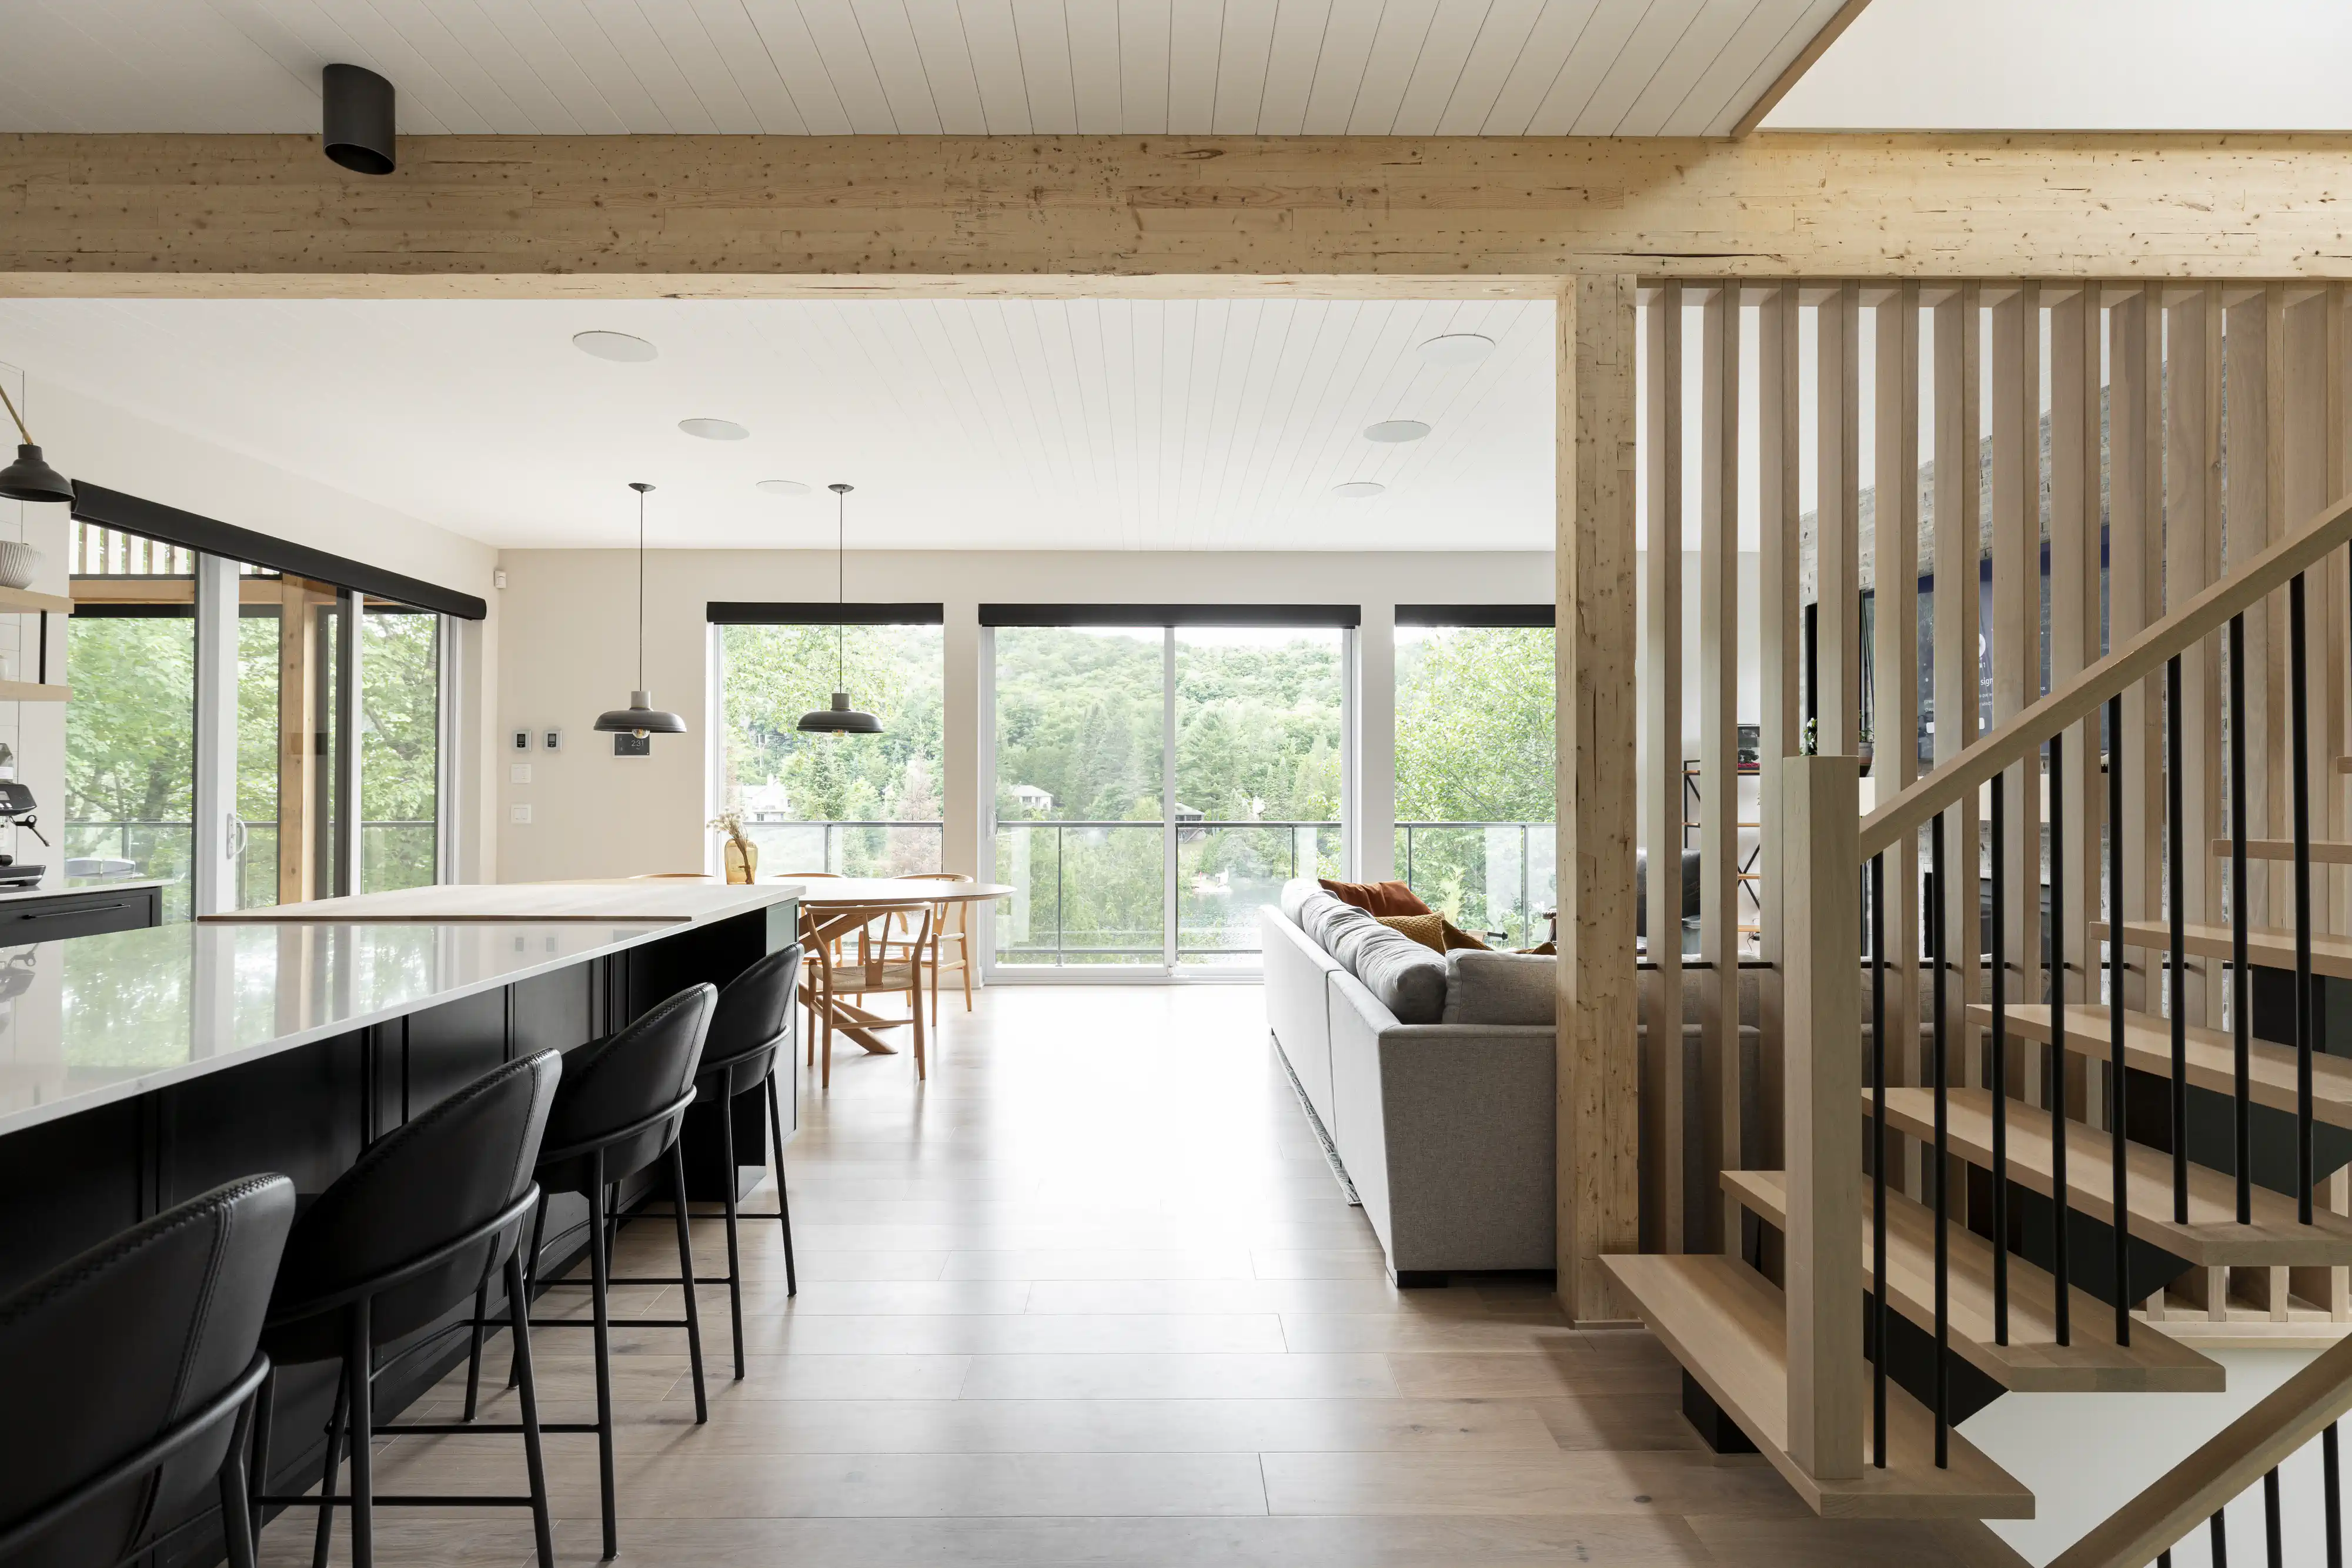 A modern kitchen and living room with a view of the outdoors, interior by Sarah Brown Design